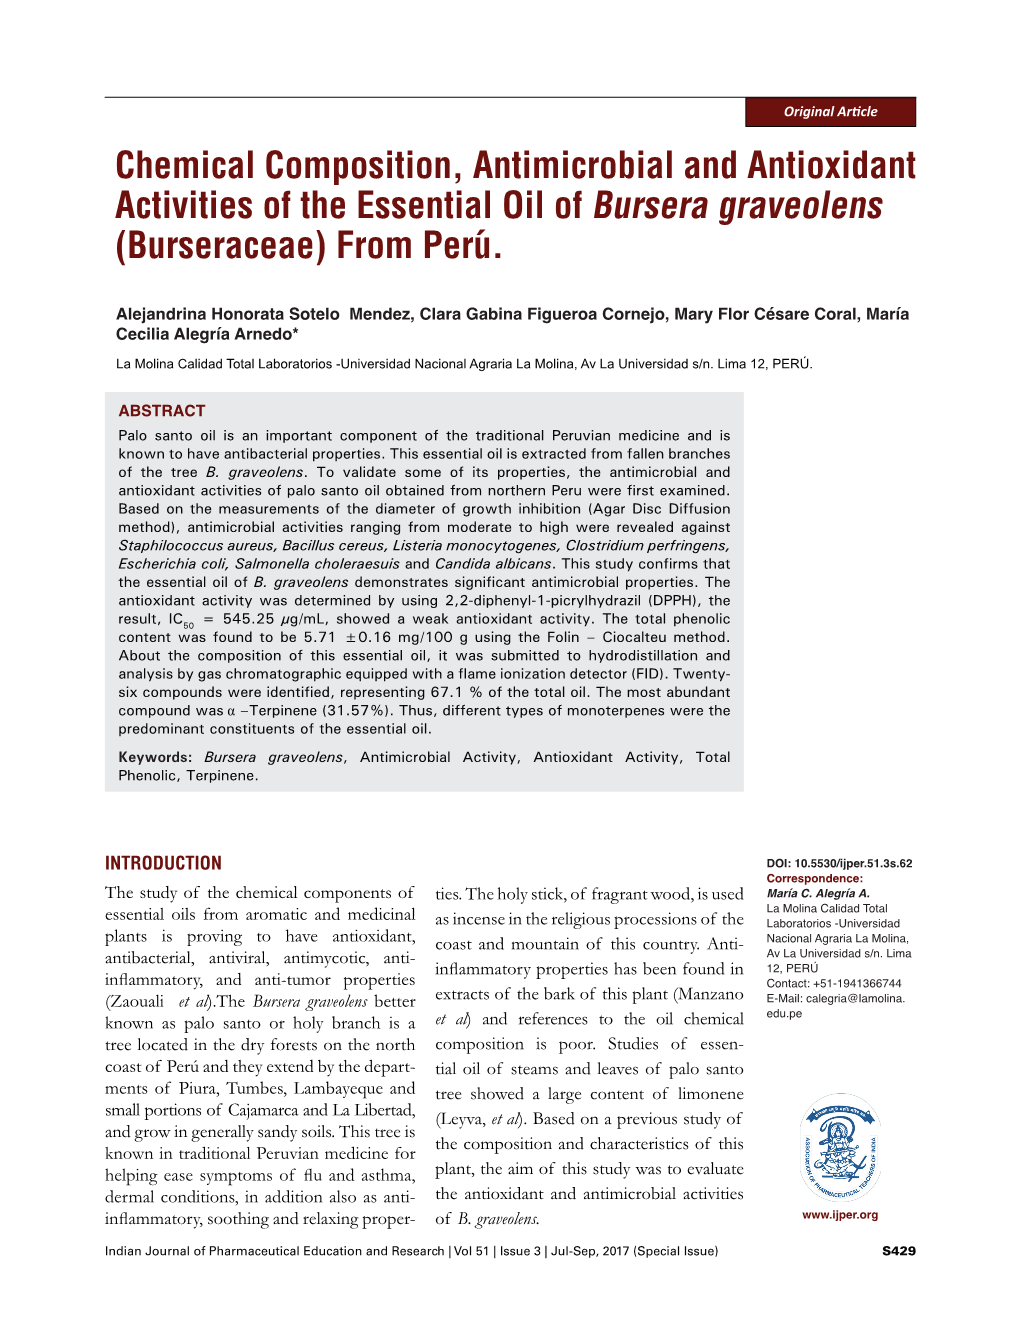 Chemical Composition, Antimicrobial and Antioxidant Activities of the Essential Oil of Bursera Graveolens (Burseraceae) from Perú